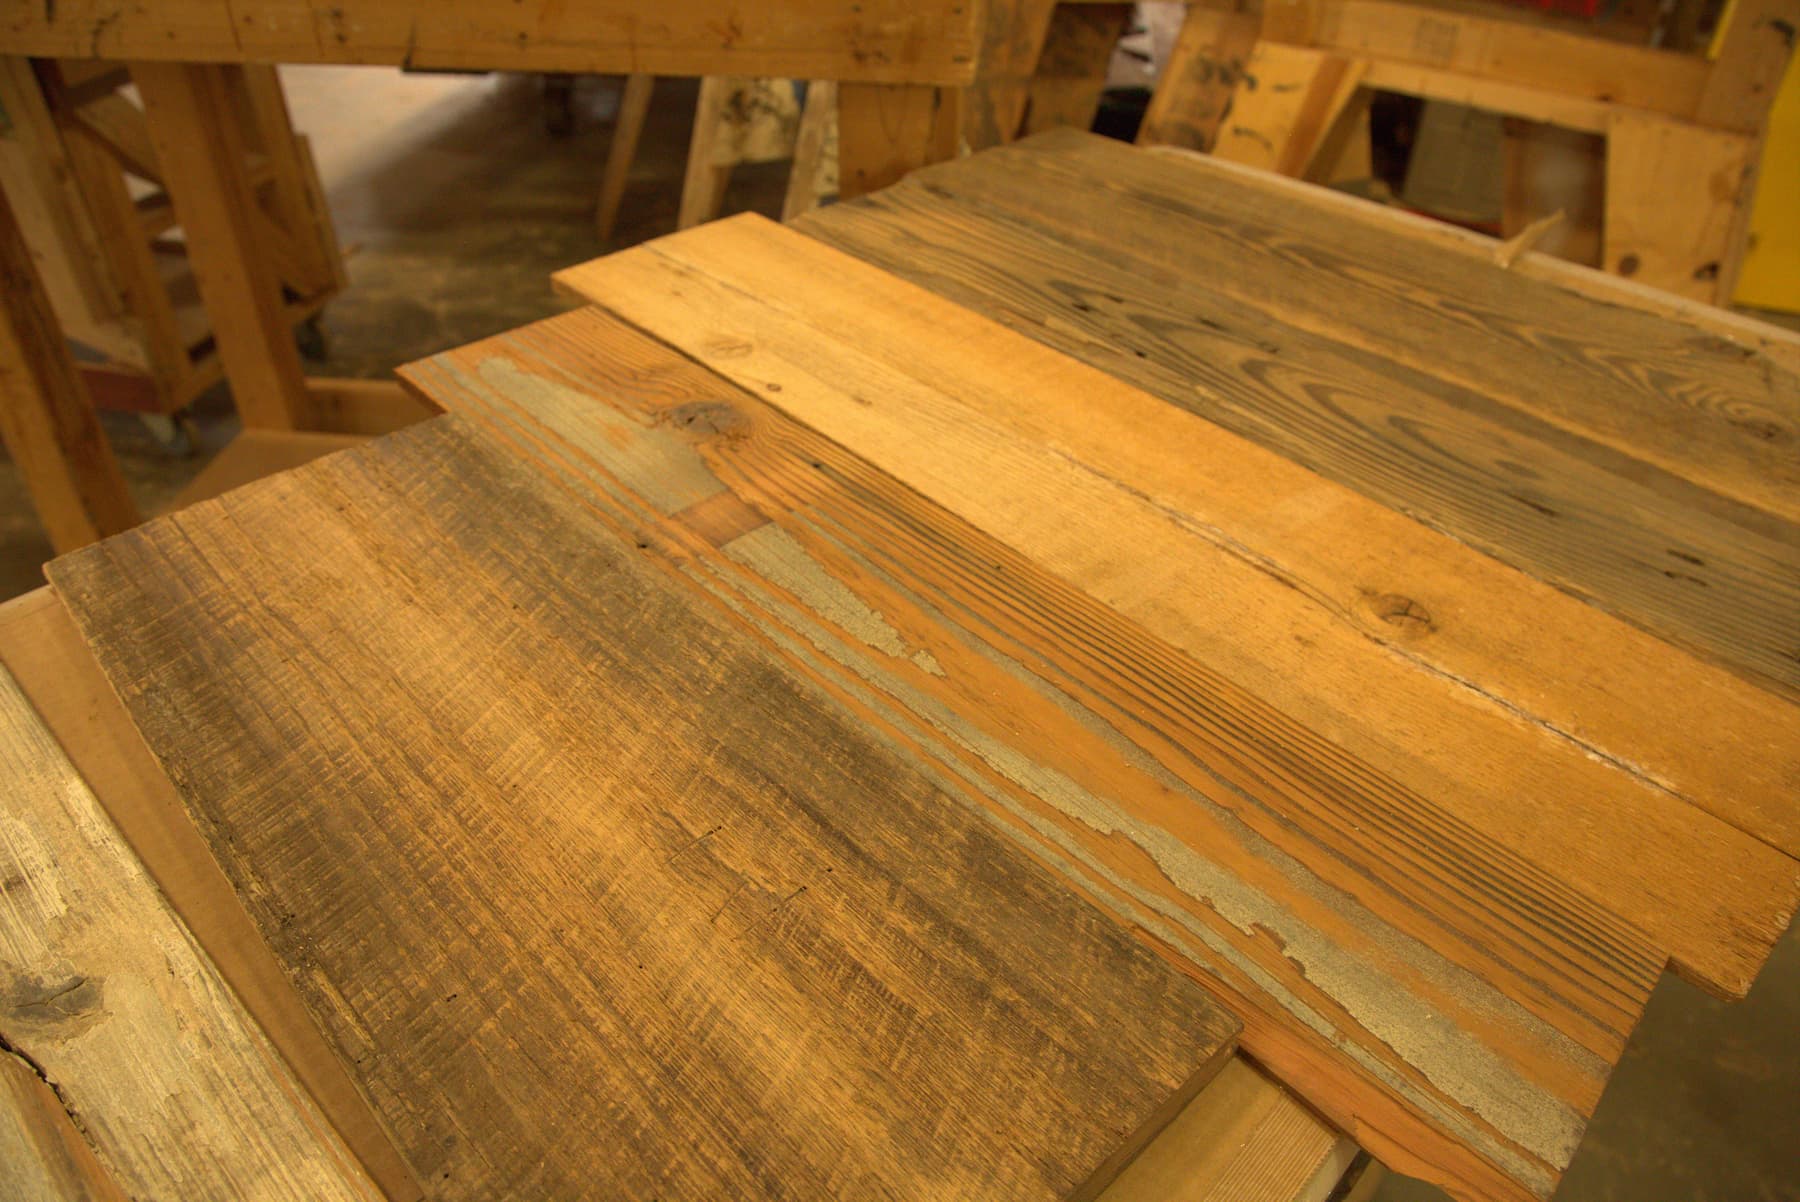 Four Reasons Why You Should Choose Reclaimed Wood For Your Barn Door